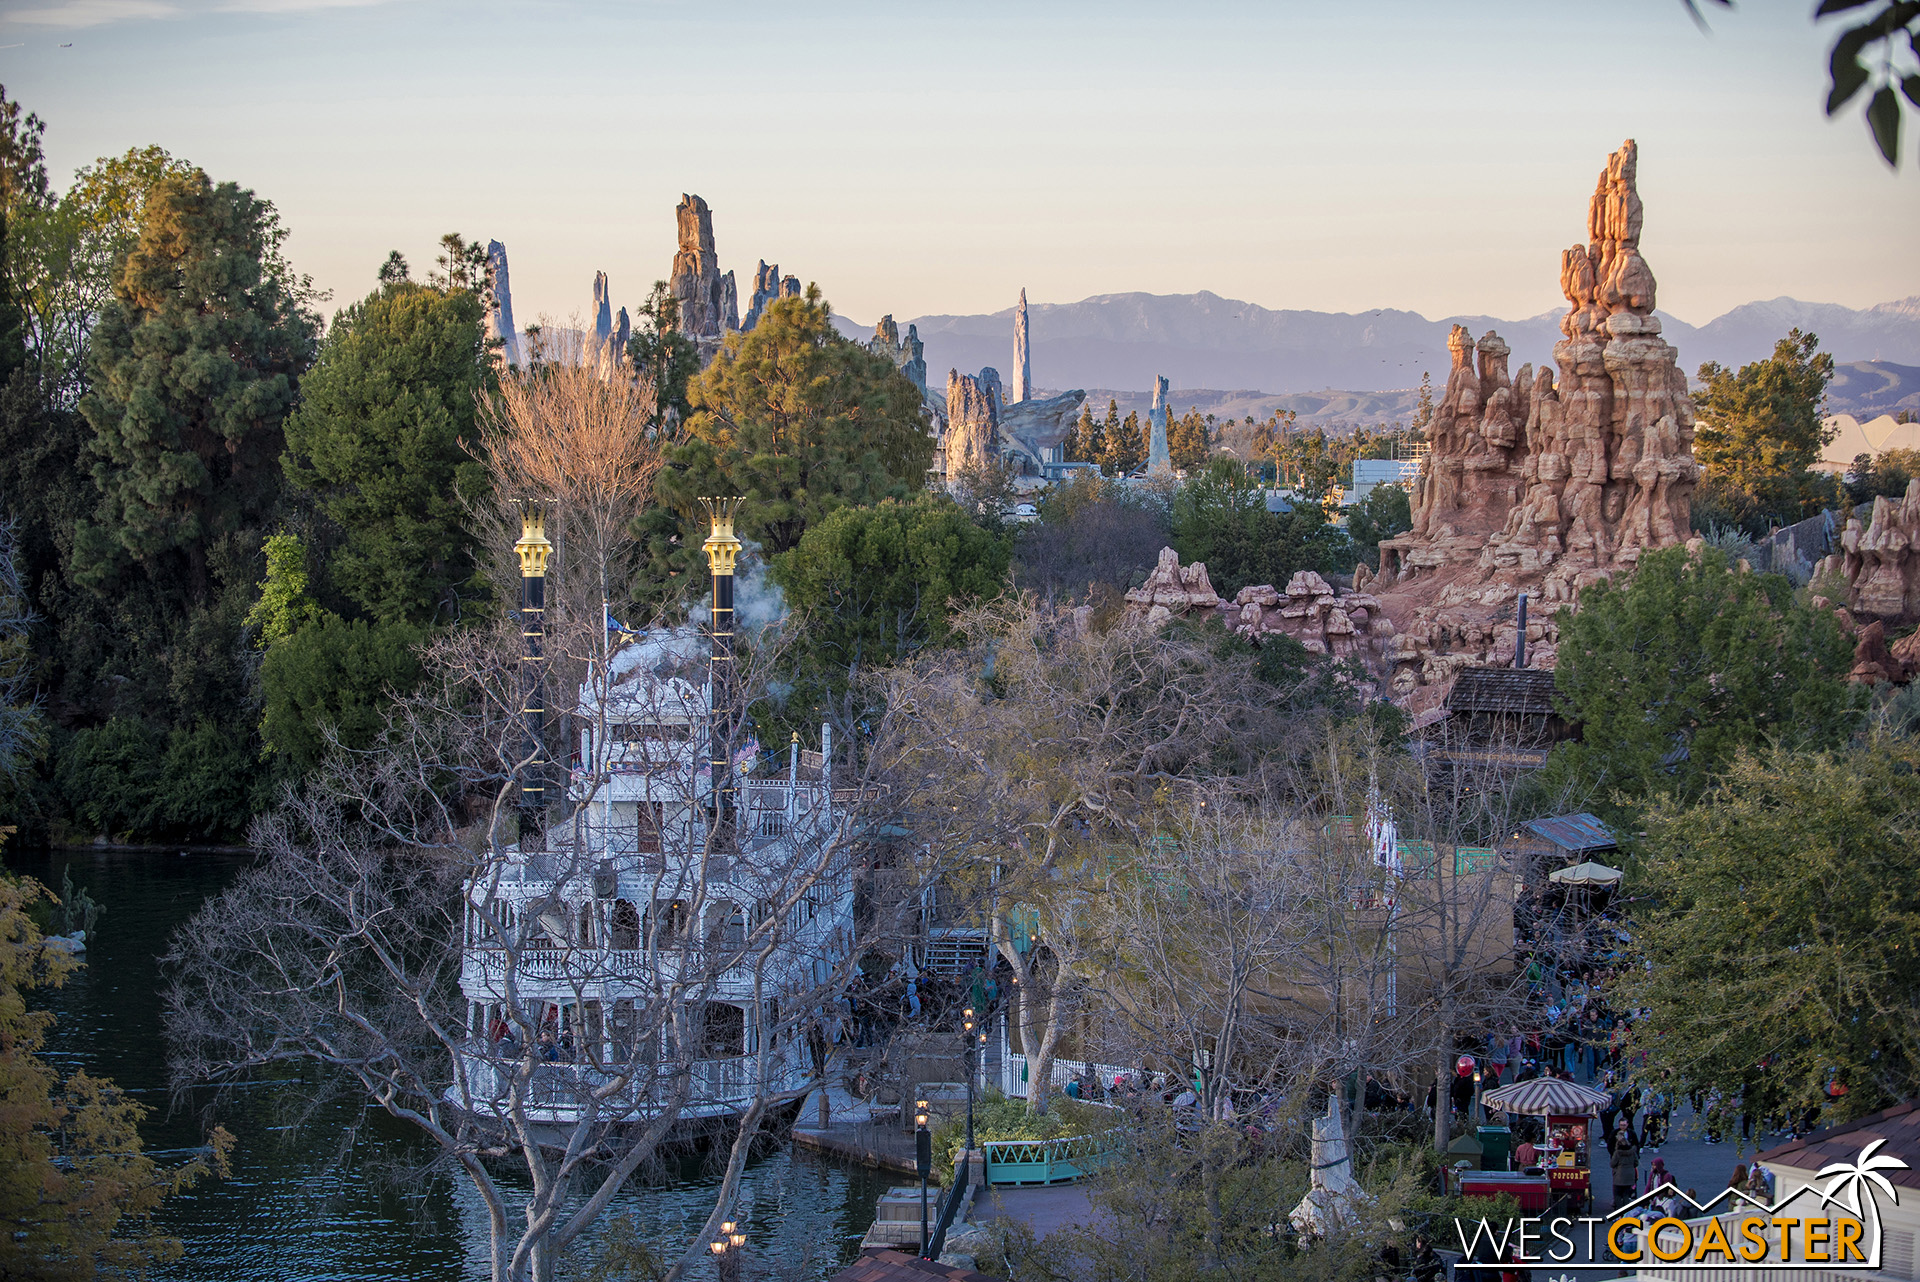  The great thing about Batuu is that it’s not being treated as another themed land within Disneyland.  It’s being treated as its own world.  The merchandise will not be Disney or Star Wars branded.  They’ll be almost artisan versions of recognizable 